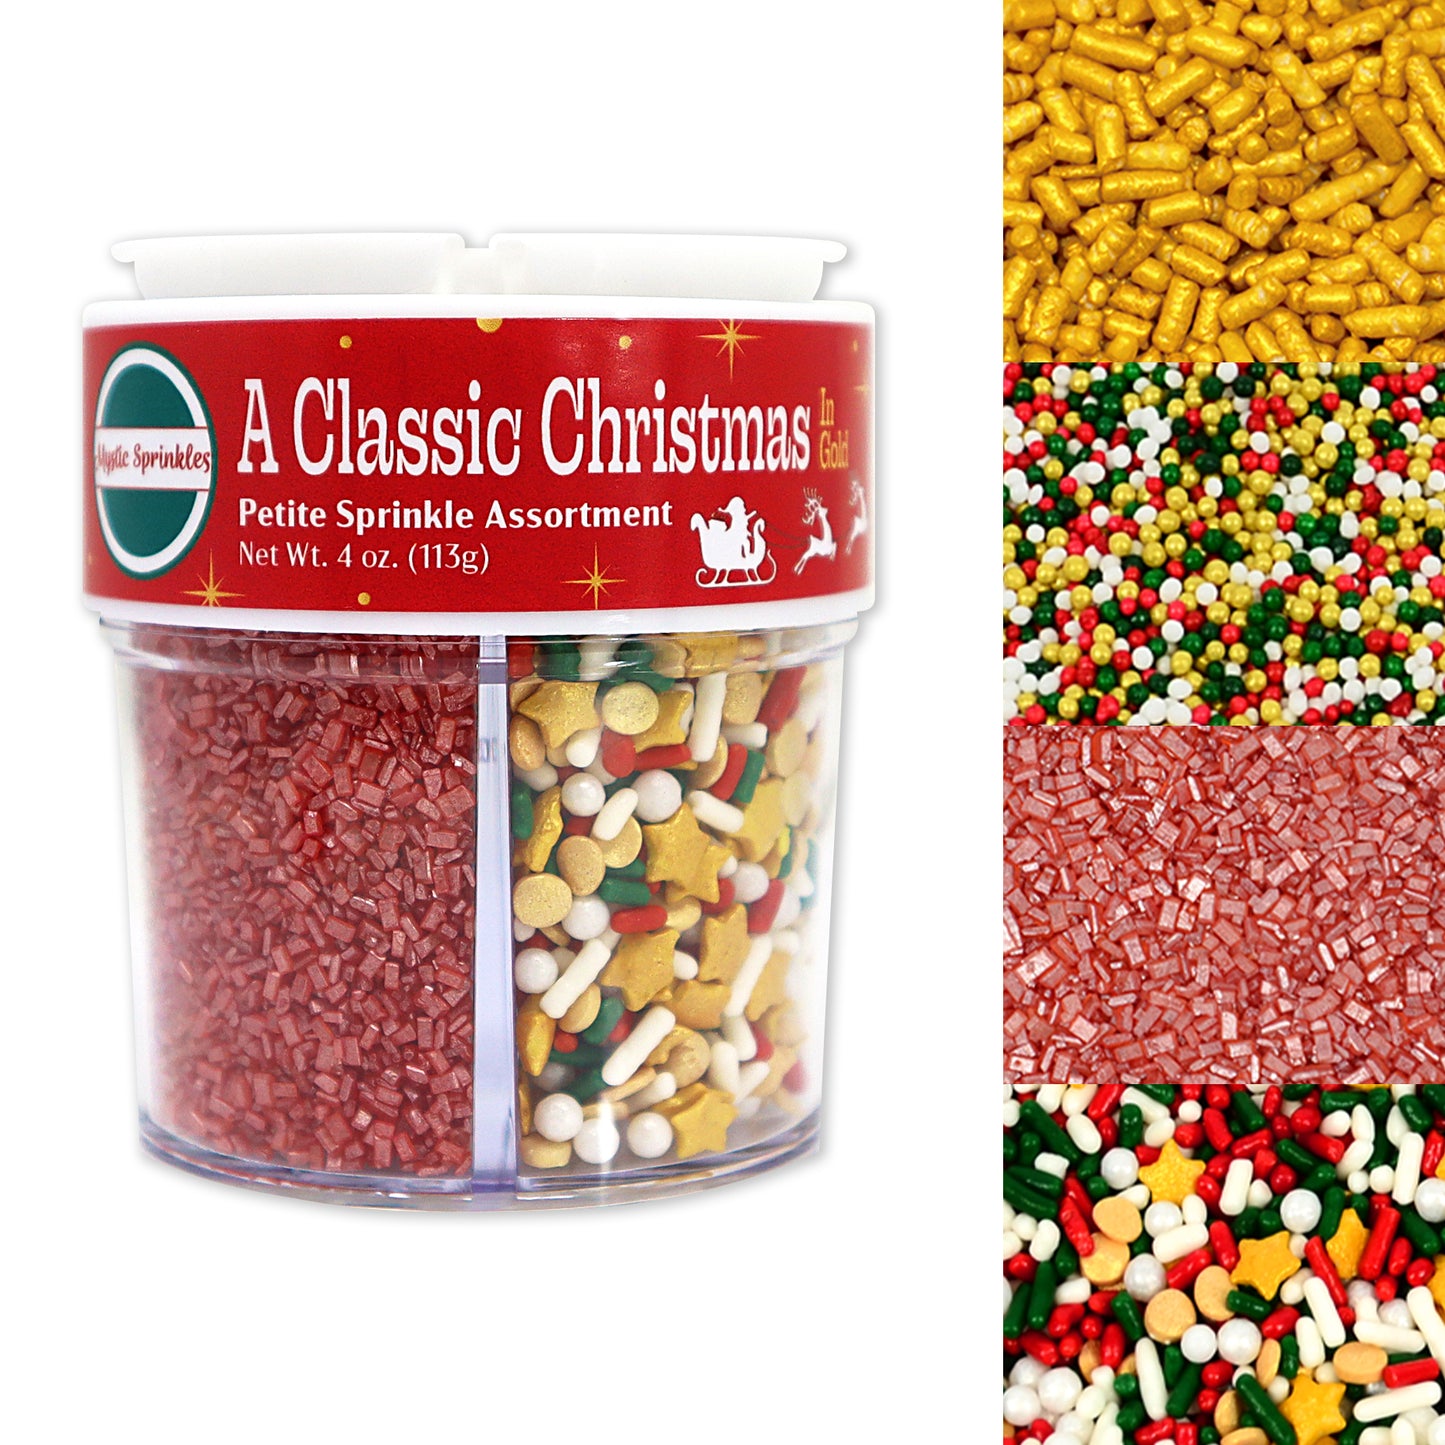 A Classic Christmas in Gold Petite Sprinkle Assortment 4oz